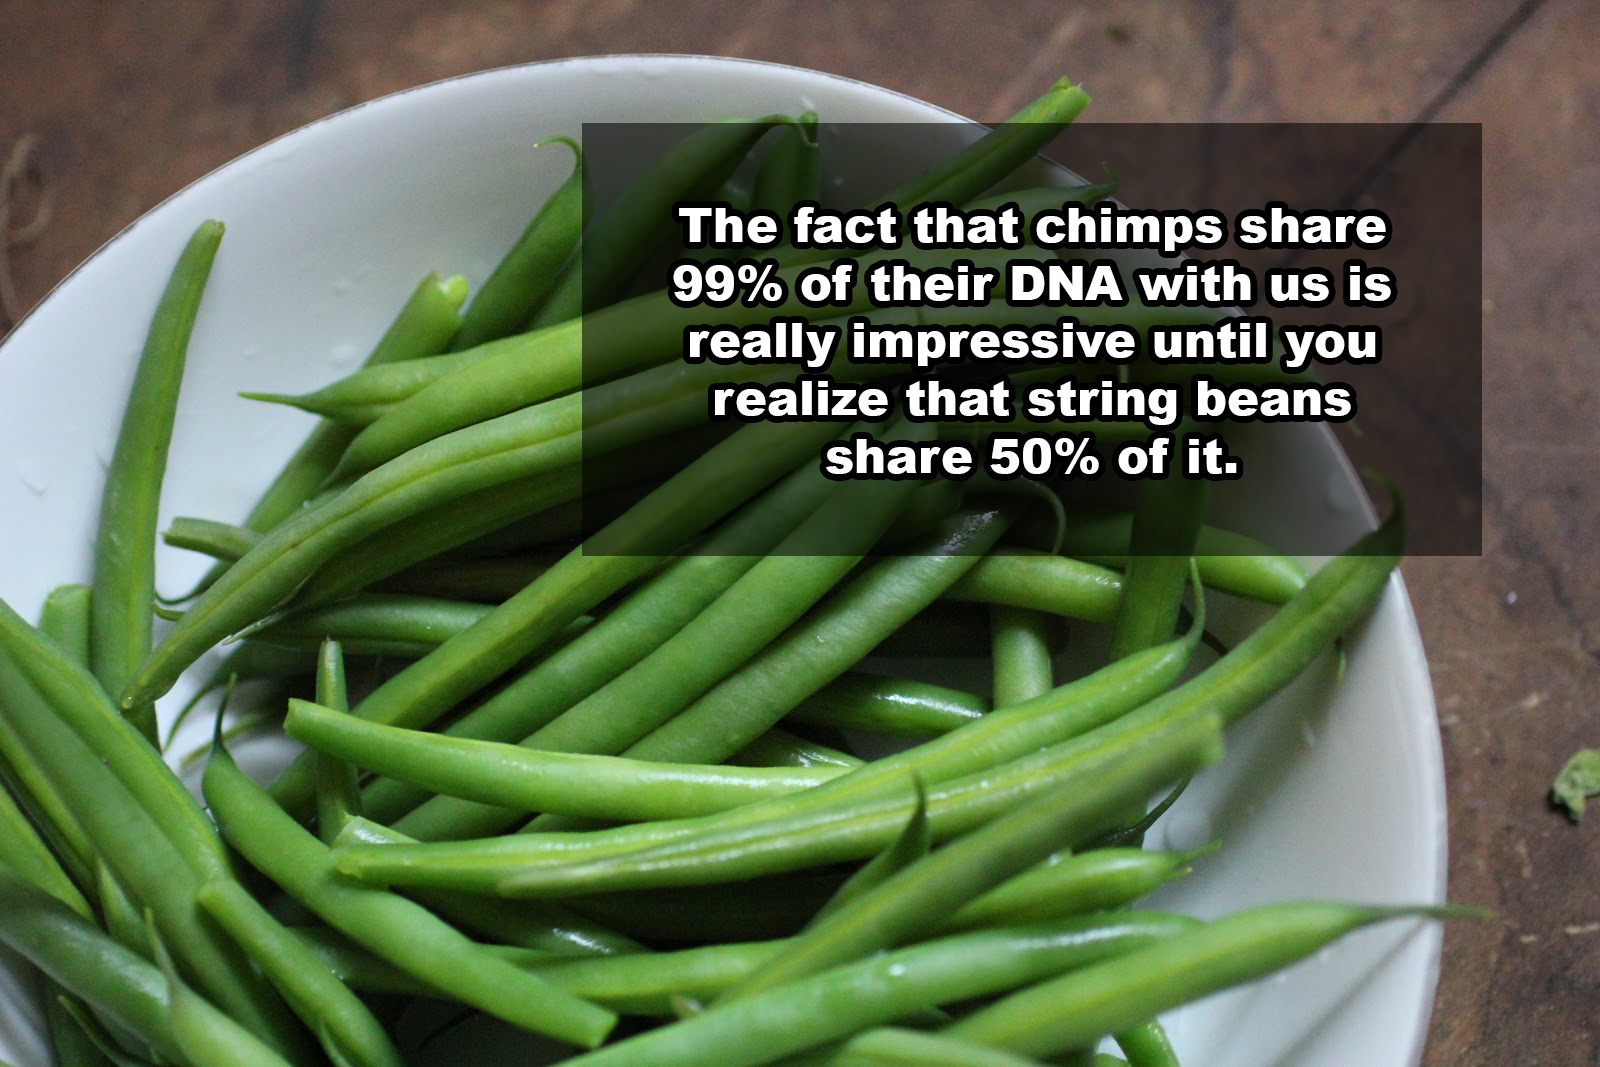 Green bean - The fact that chimps 99% of their Dna with us is really impressive until you realize that string beans 50% of it.